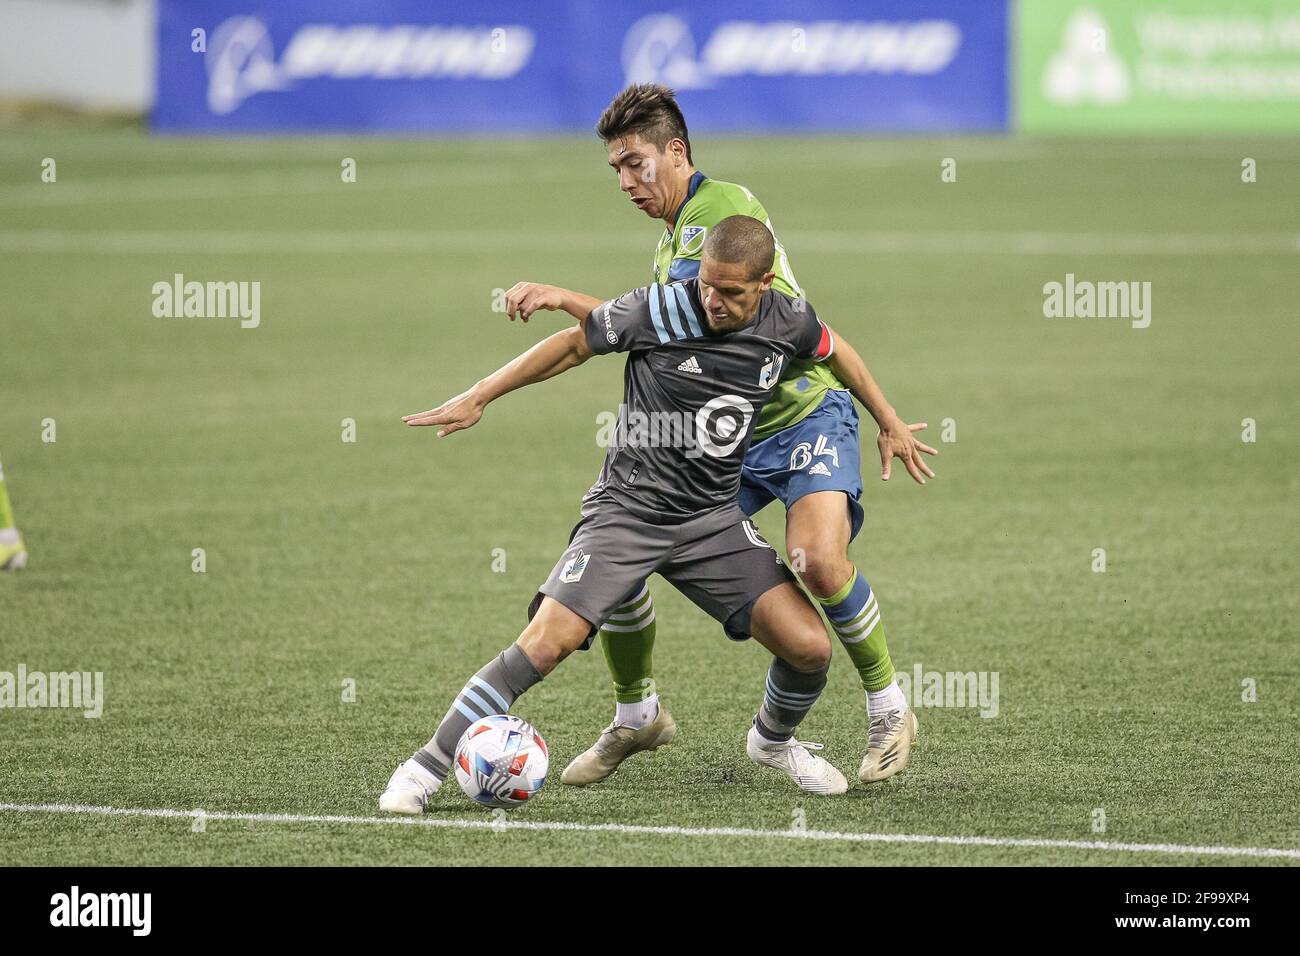 Minnesota United FC midfielder Osvaldo Alonso (6) and Seattle Sounders FC midfielder Josh Atencio (84) battle for the ball during the second half of a Stock Photo